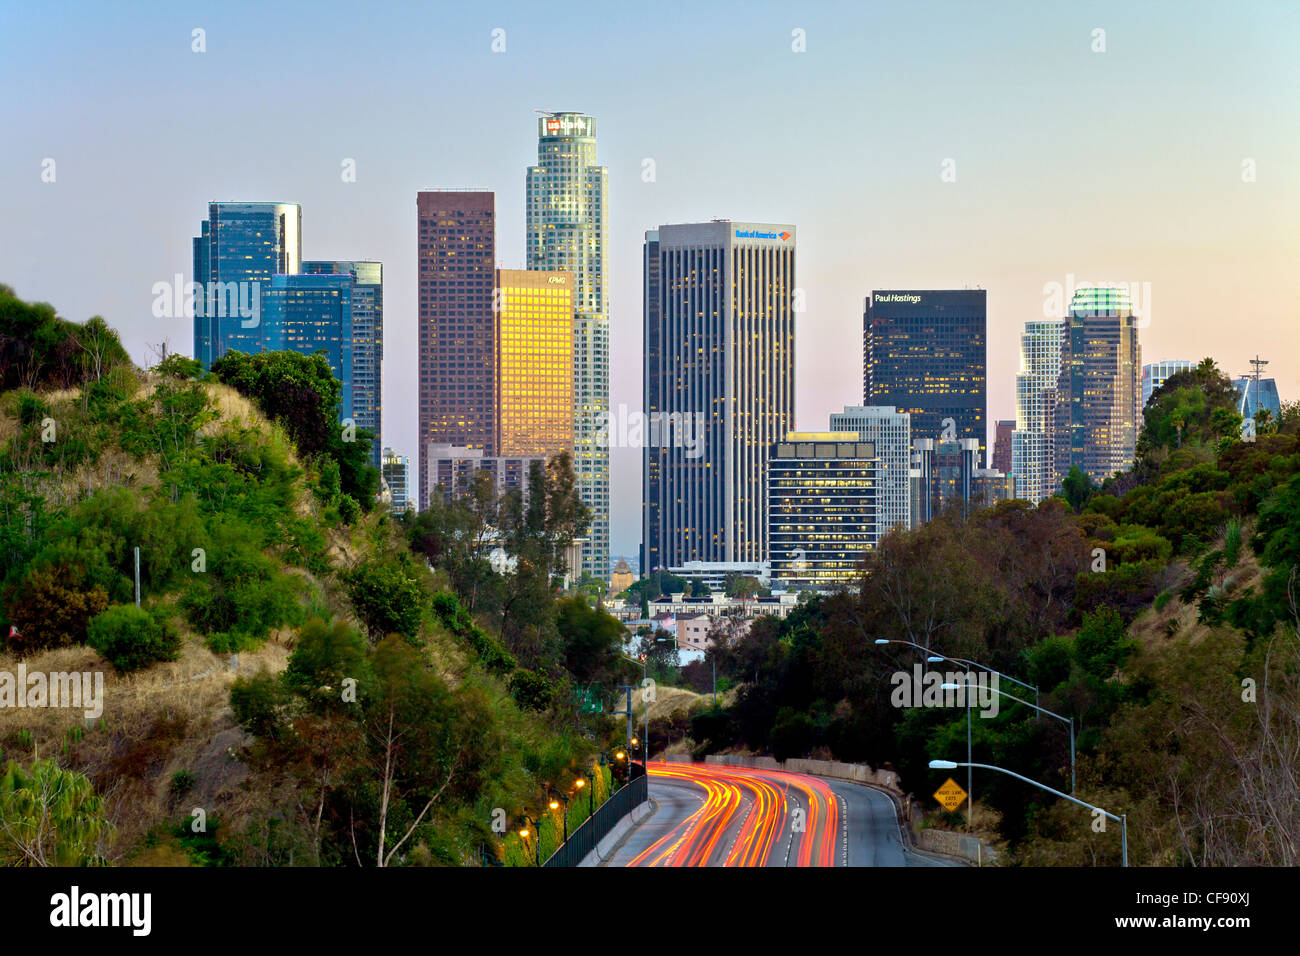 Pasadena Freeway (CA Highway 110) Leading to Downtown Los Angeles, California, United States of America Stock Photo